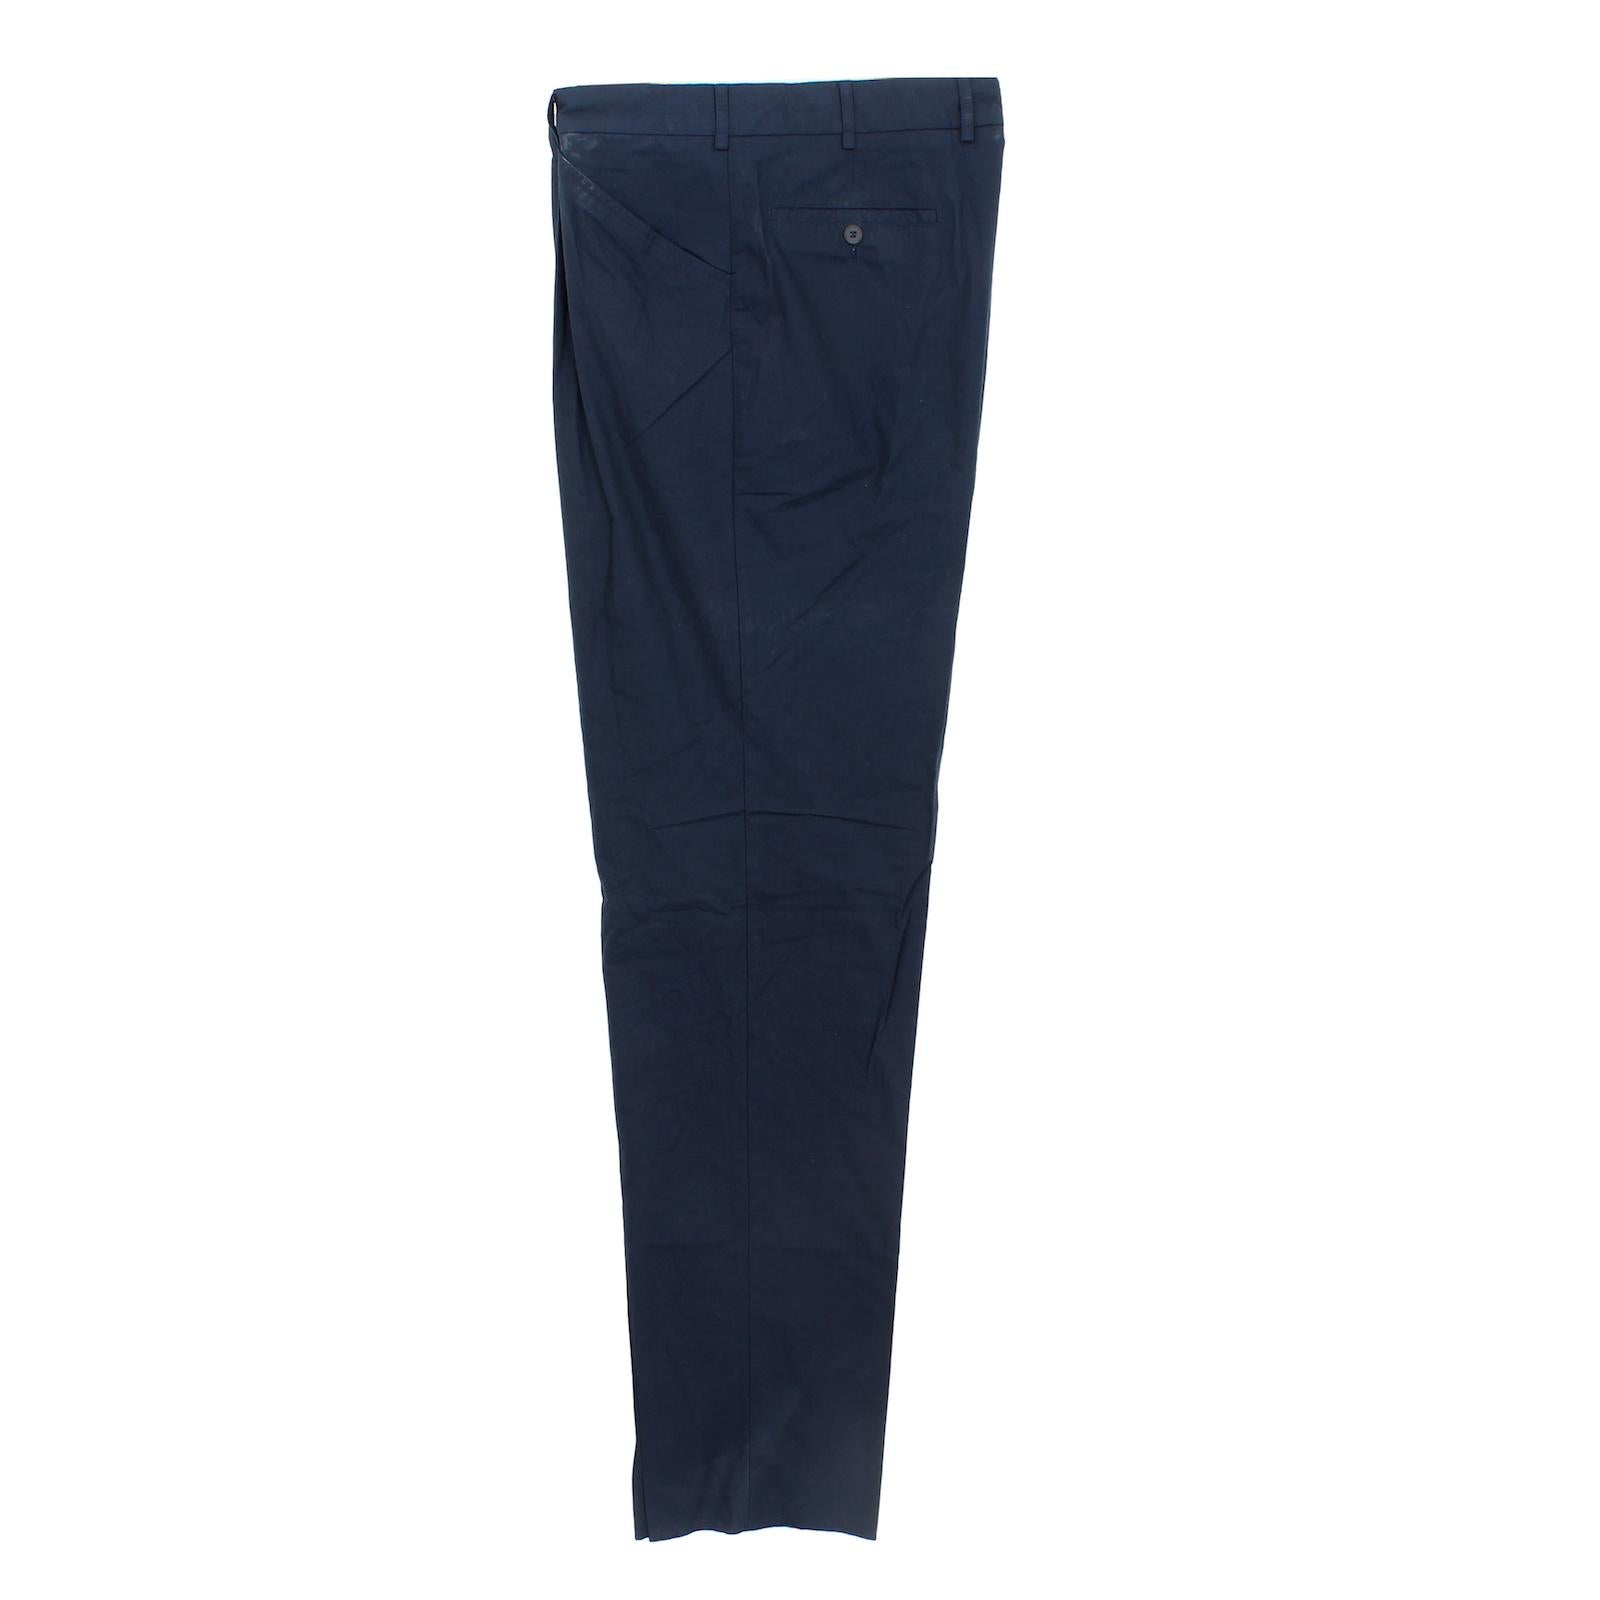 Burberry vintage 90s trousers. Classic model, blue color, 100% cotton fabric. Made in italy. New from warehouse stock.

Size: 58 It 48 Us 48 Uk

Waist: 50 cm
Length: 127 cm
Hem: 24 cm
Inseam length: 97 cm